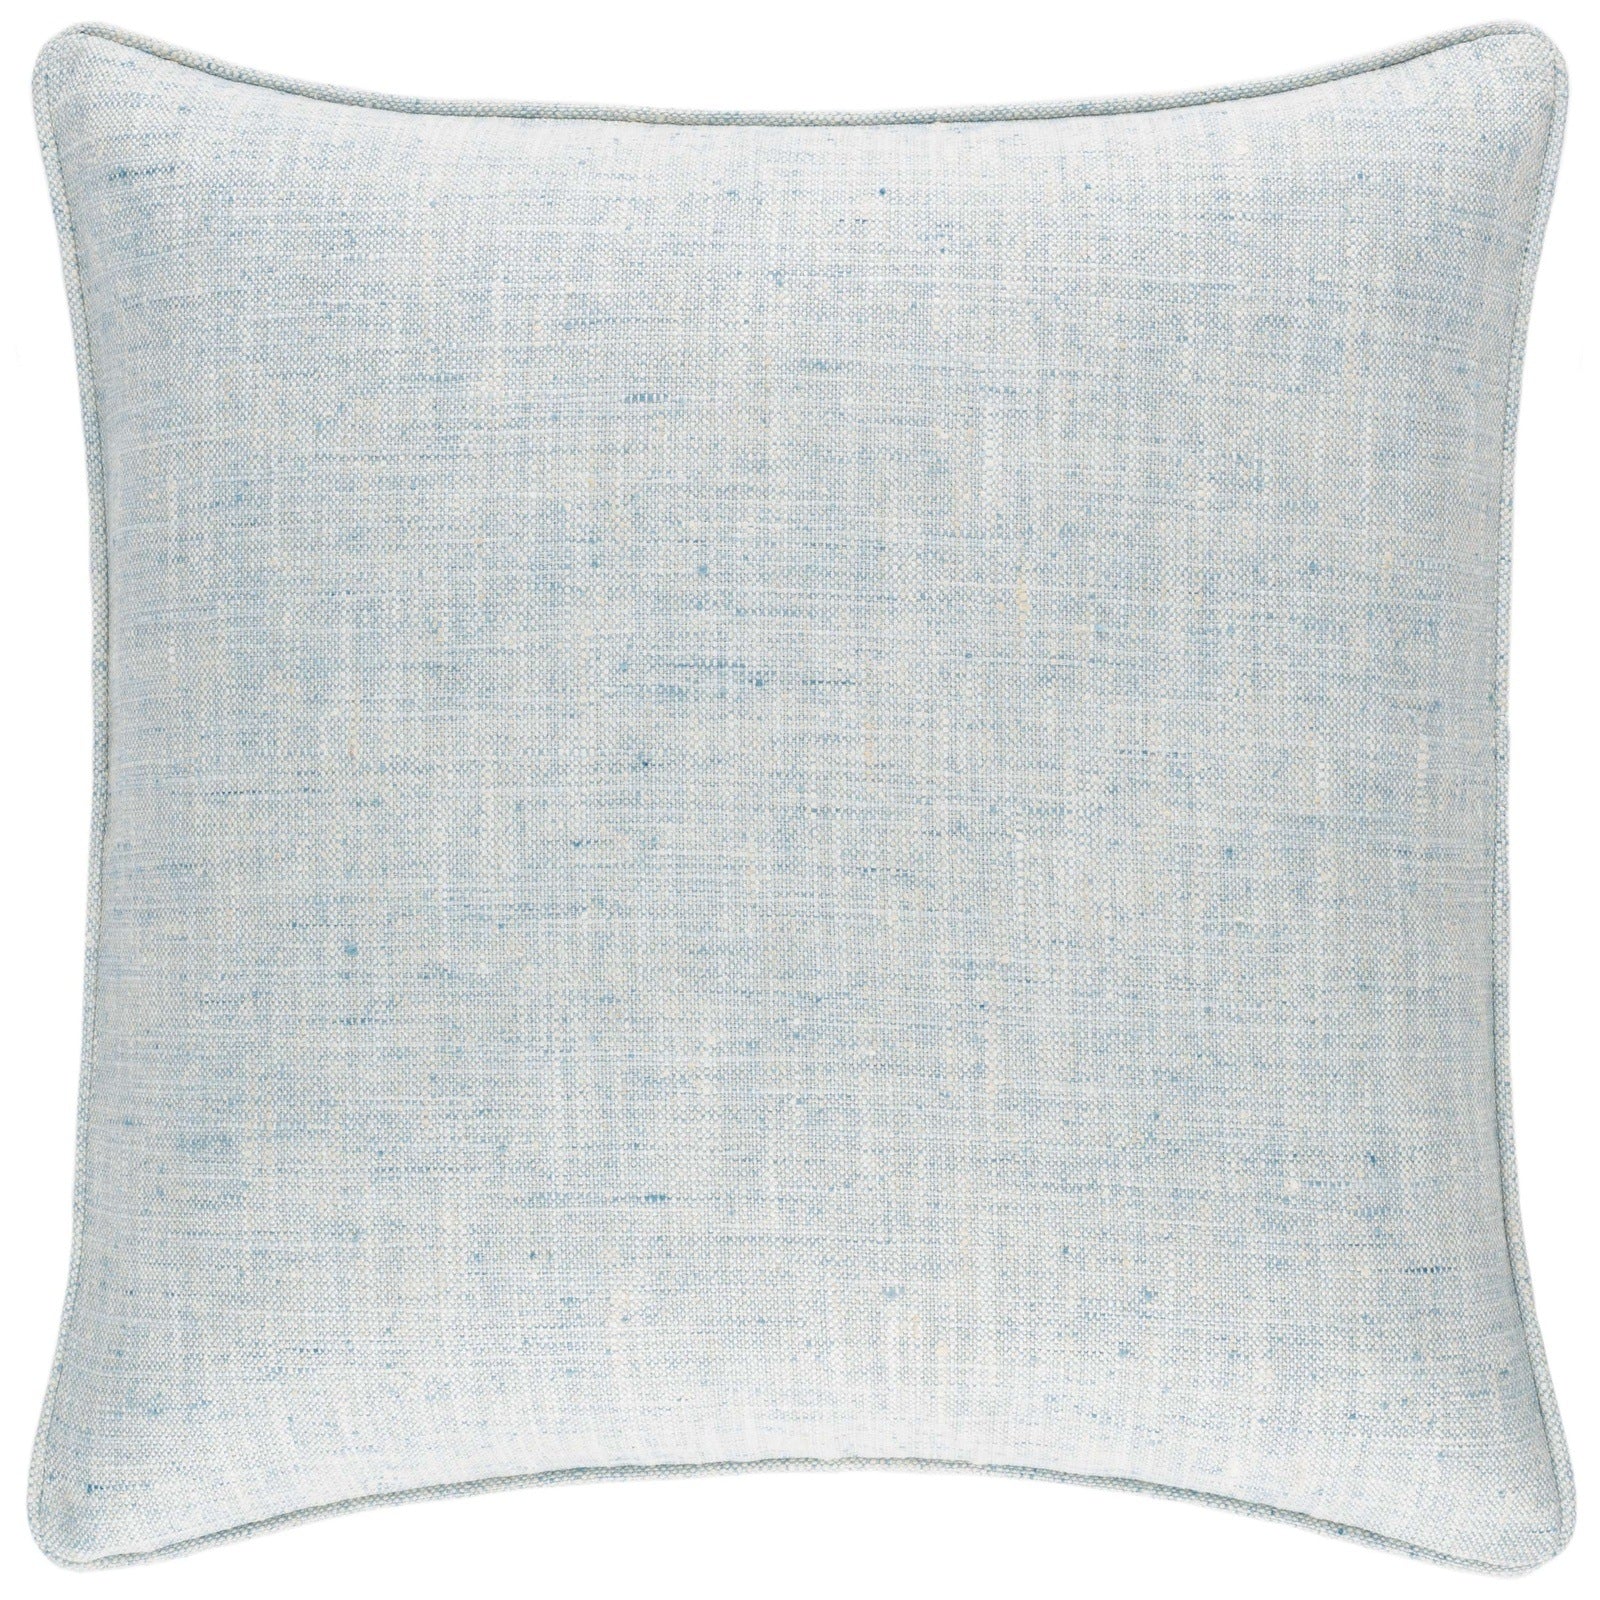 Pine Cone Hill Greylock Soft Blue Indoor/Outdoor Decorative Pillow